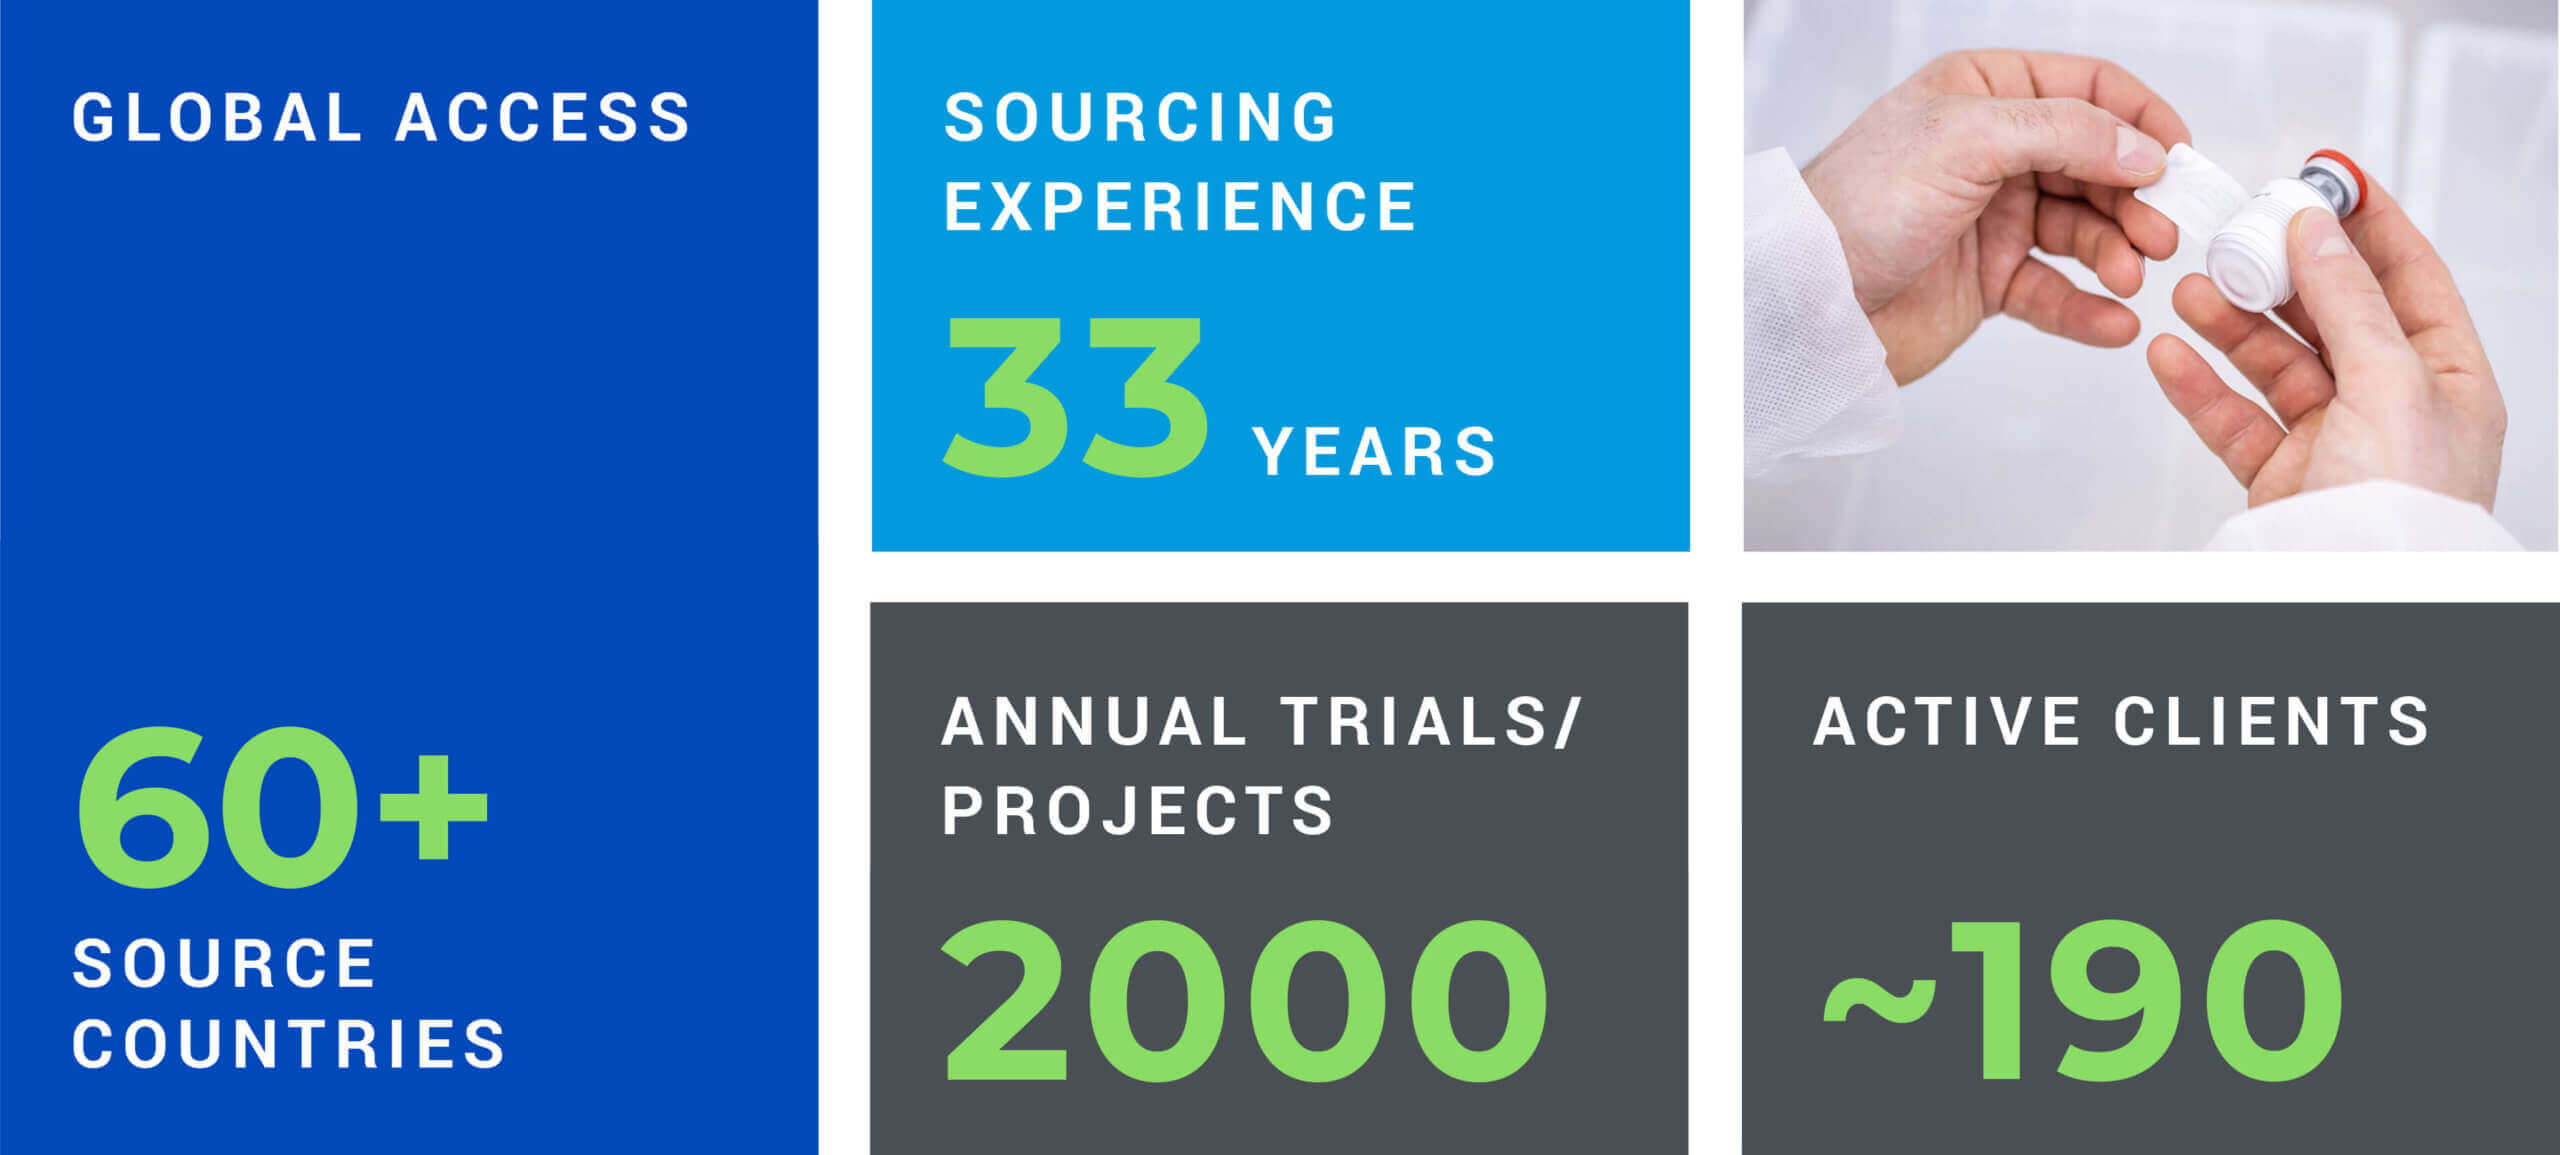 About Myonex – A Leading Clinical Trial Supply Company